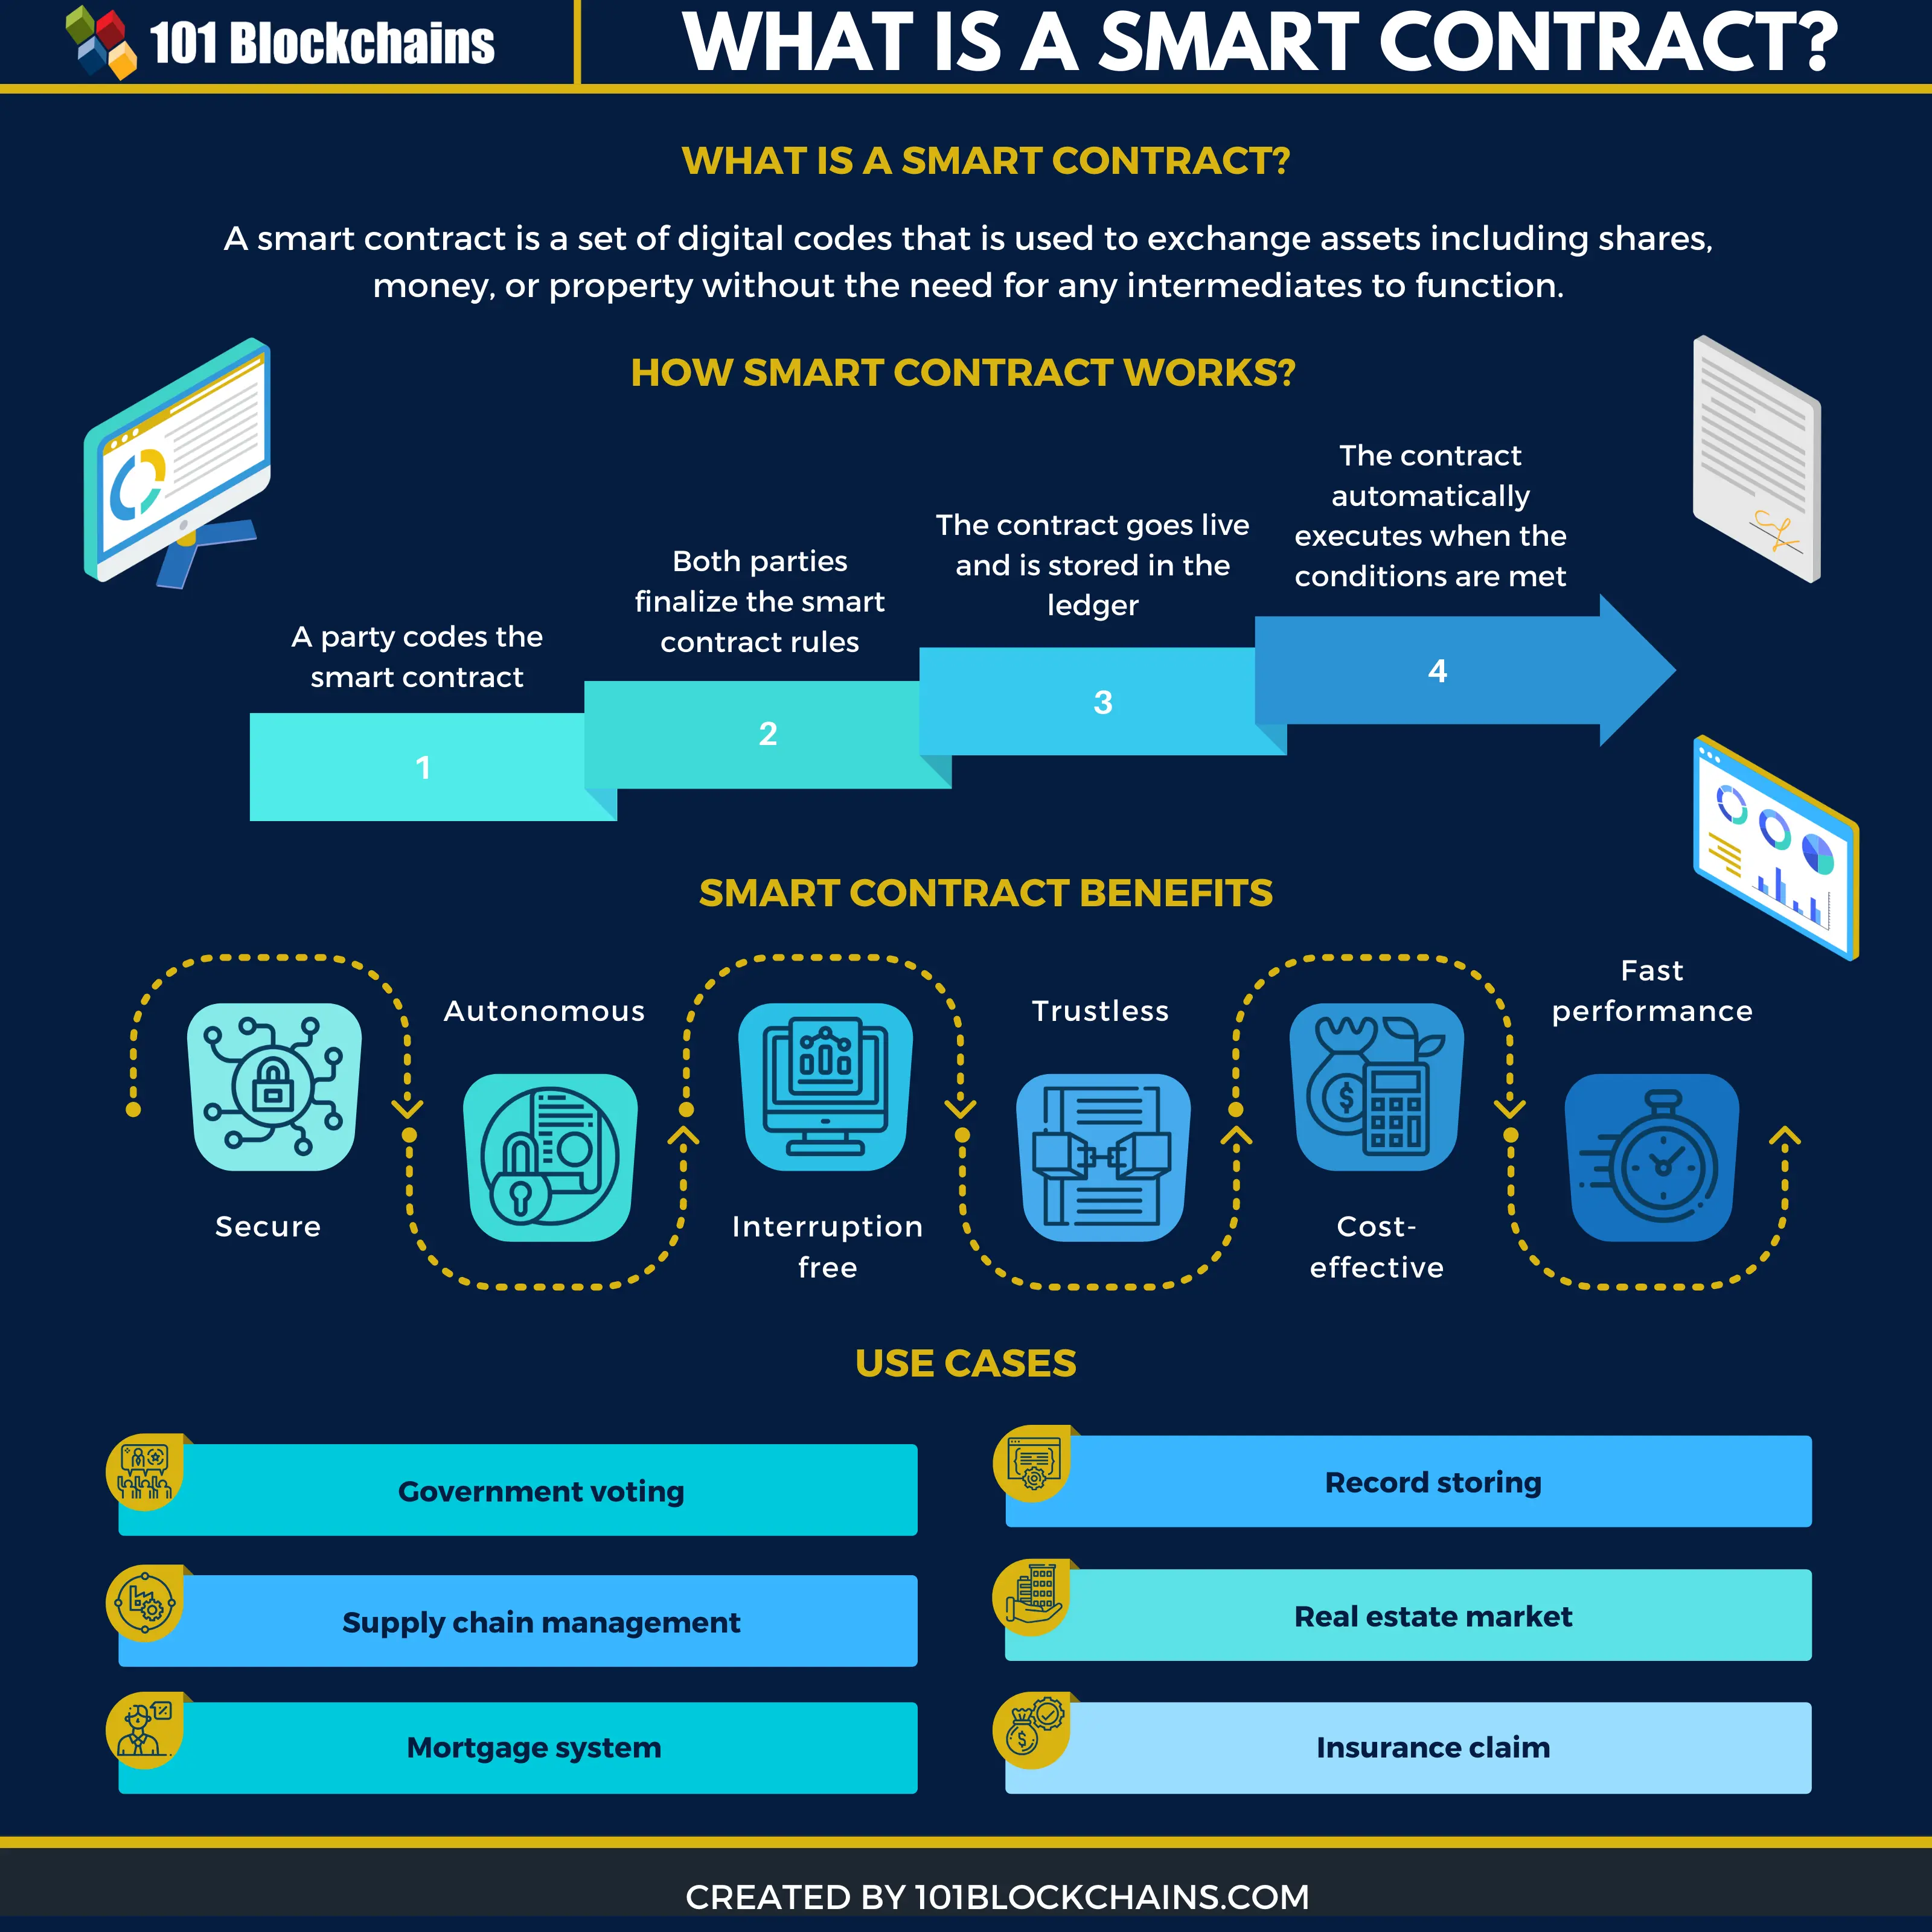 Types of Smart Contracts